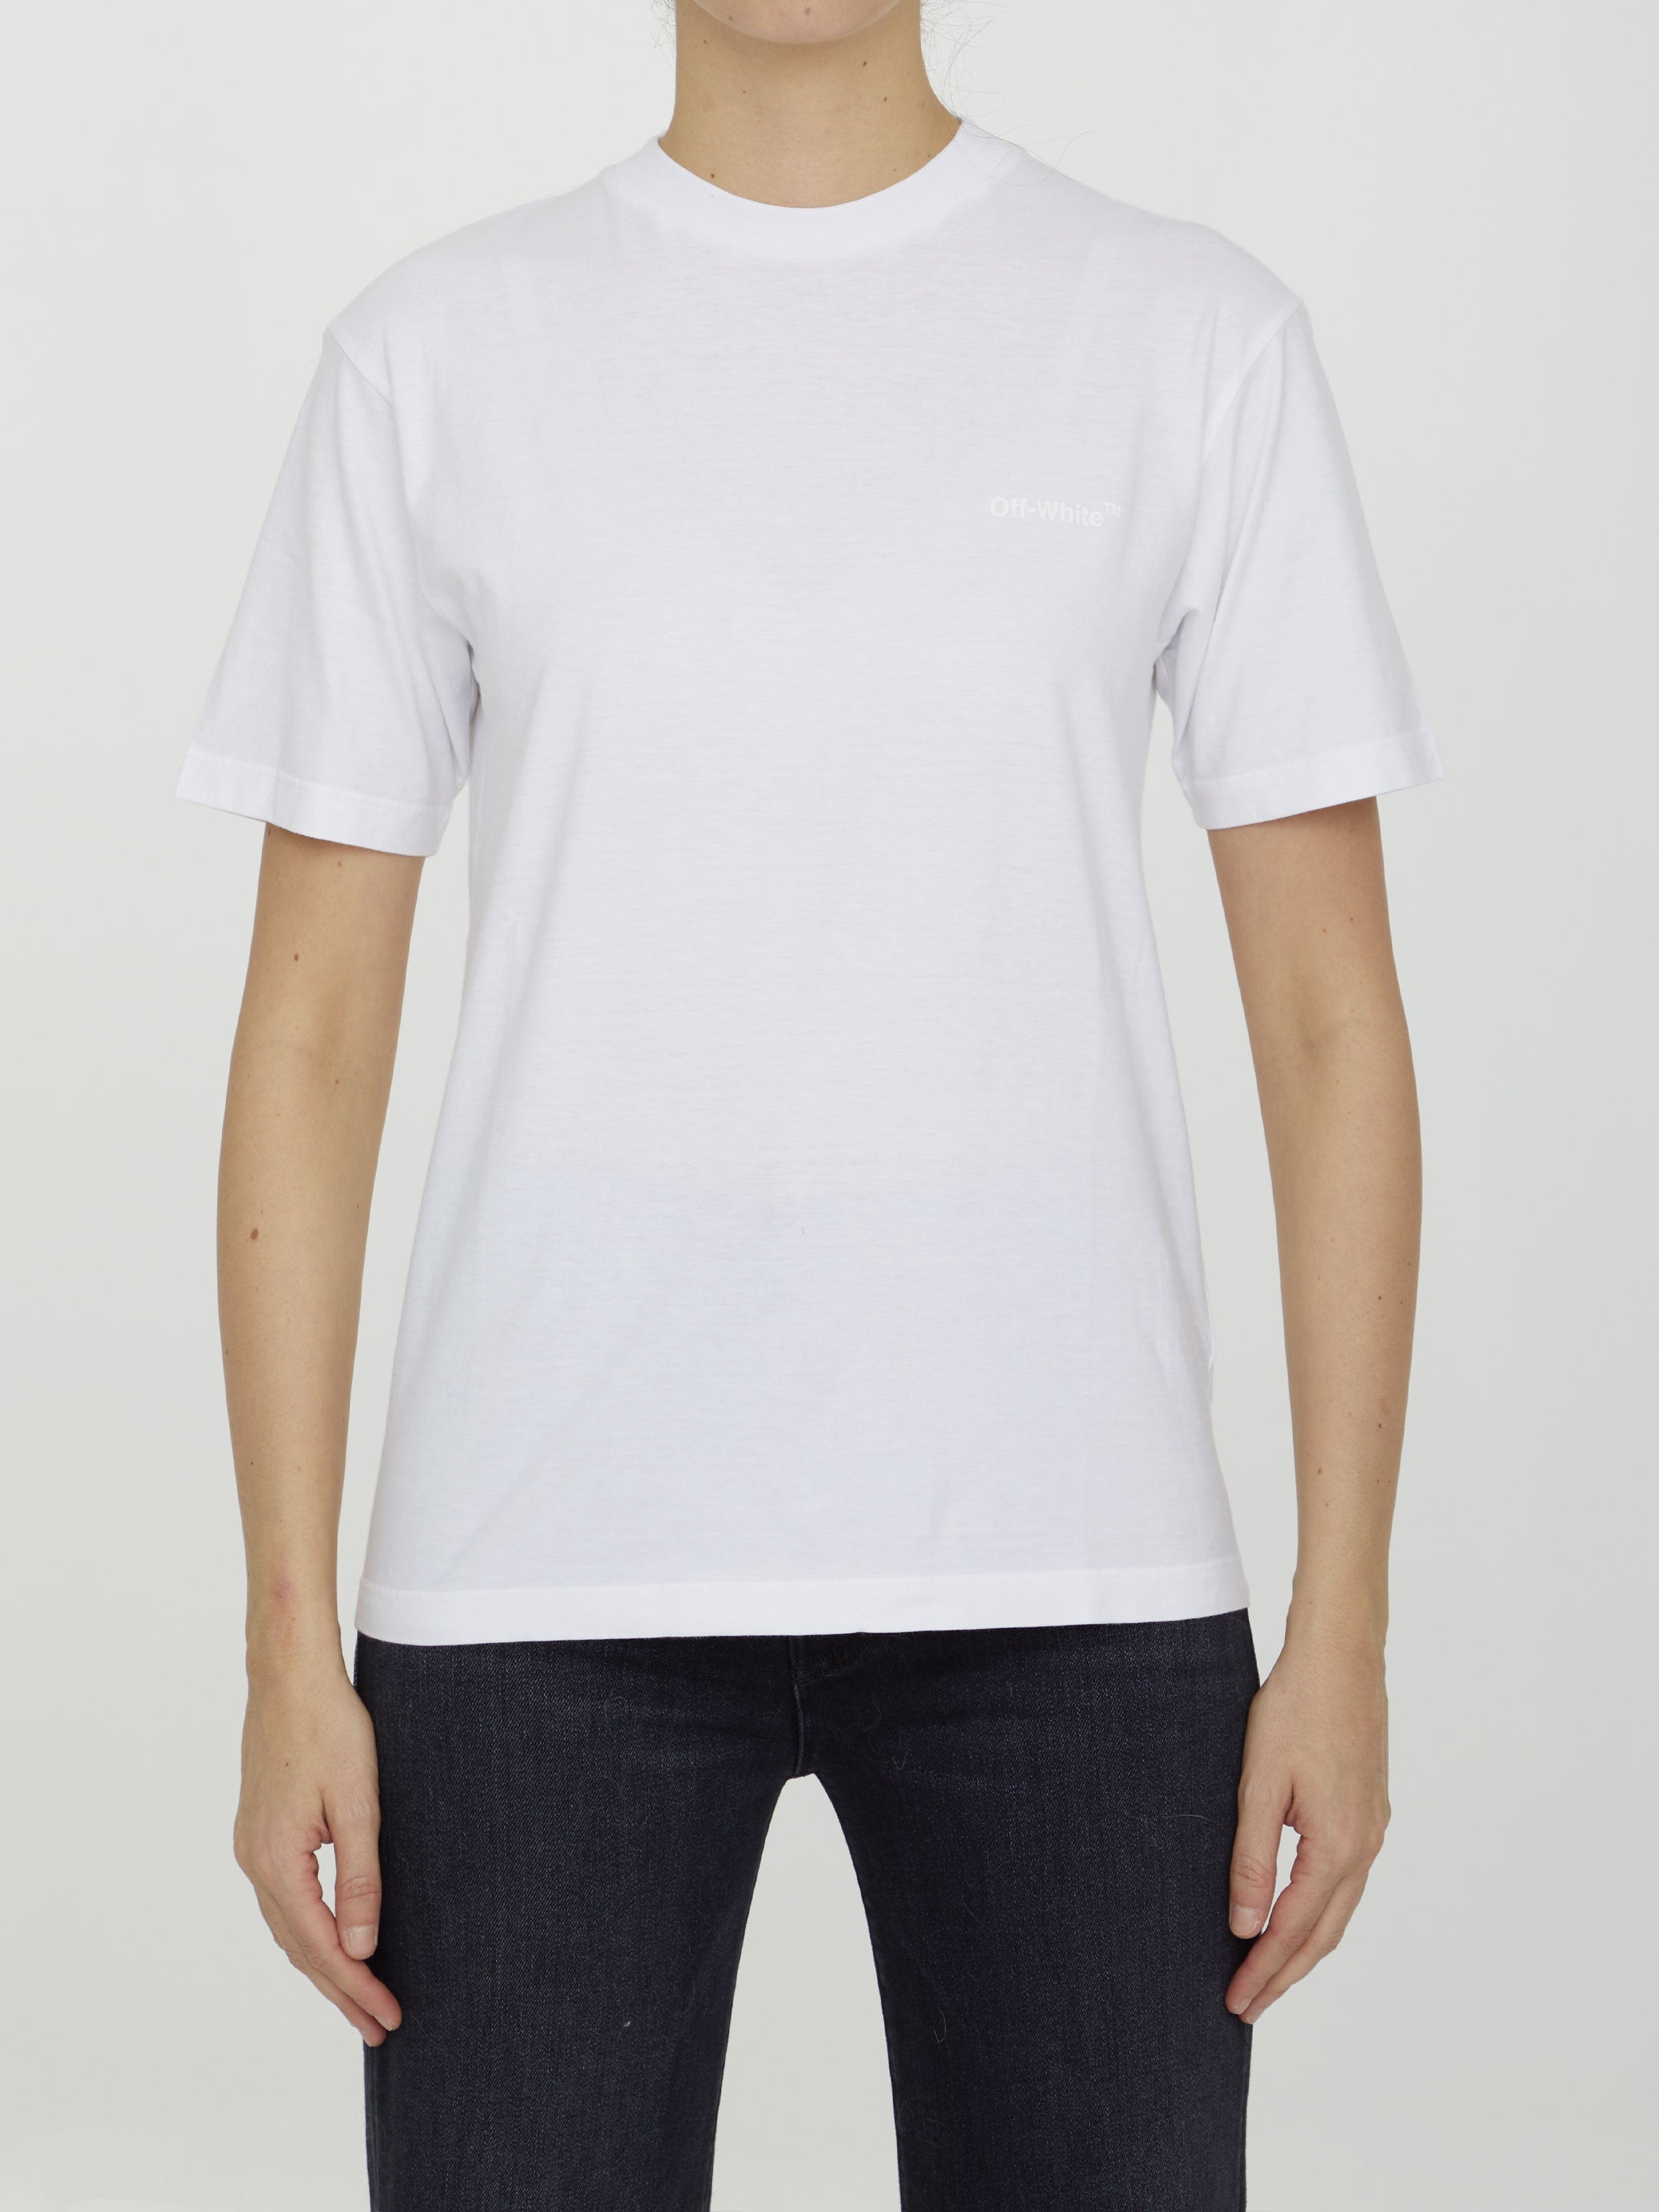 OFF-WHITE-OUTLET-SALE-Diag-print-t-shirt-Shirts-M-WHITE-ARCHIVE-COLLECTION.jpg